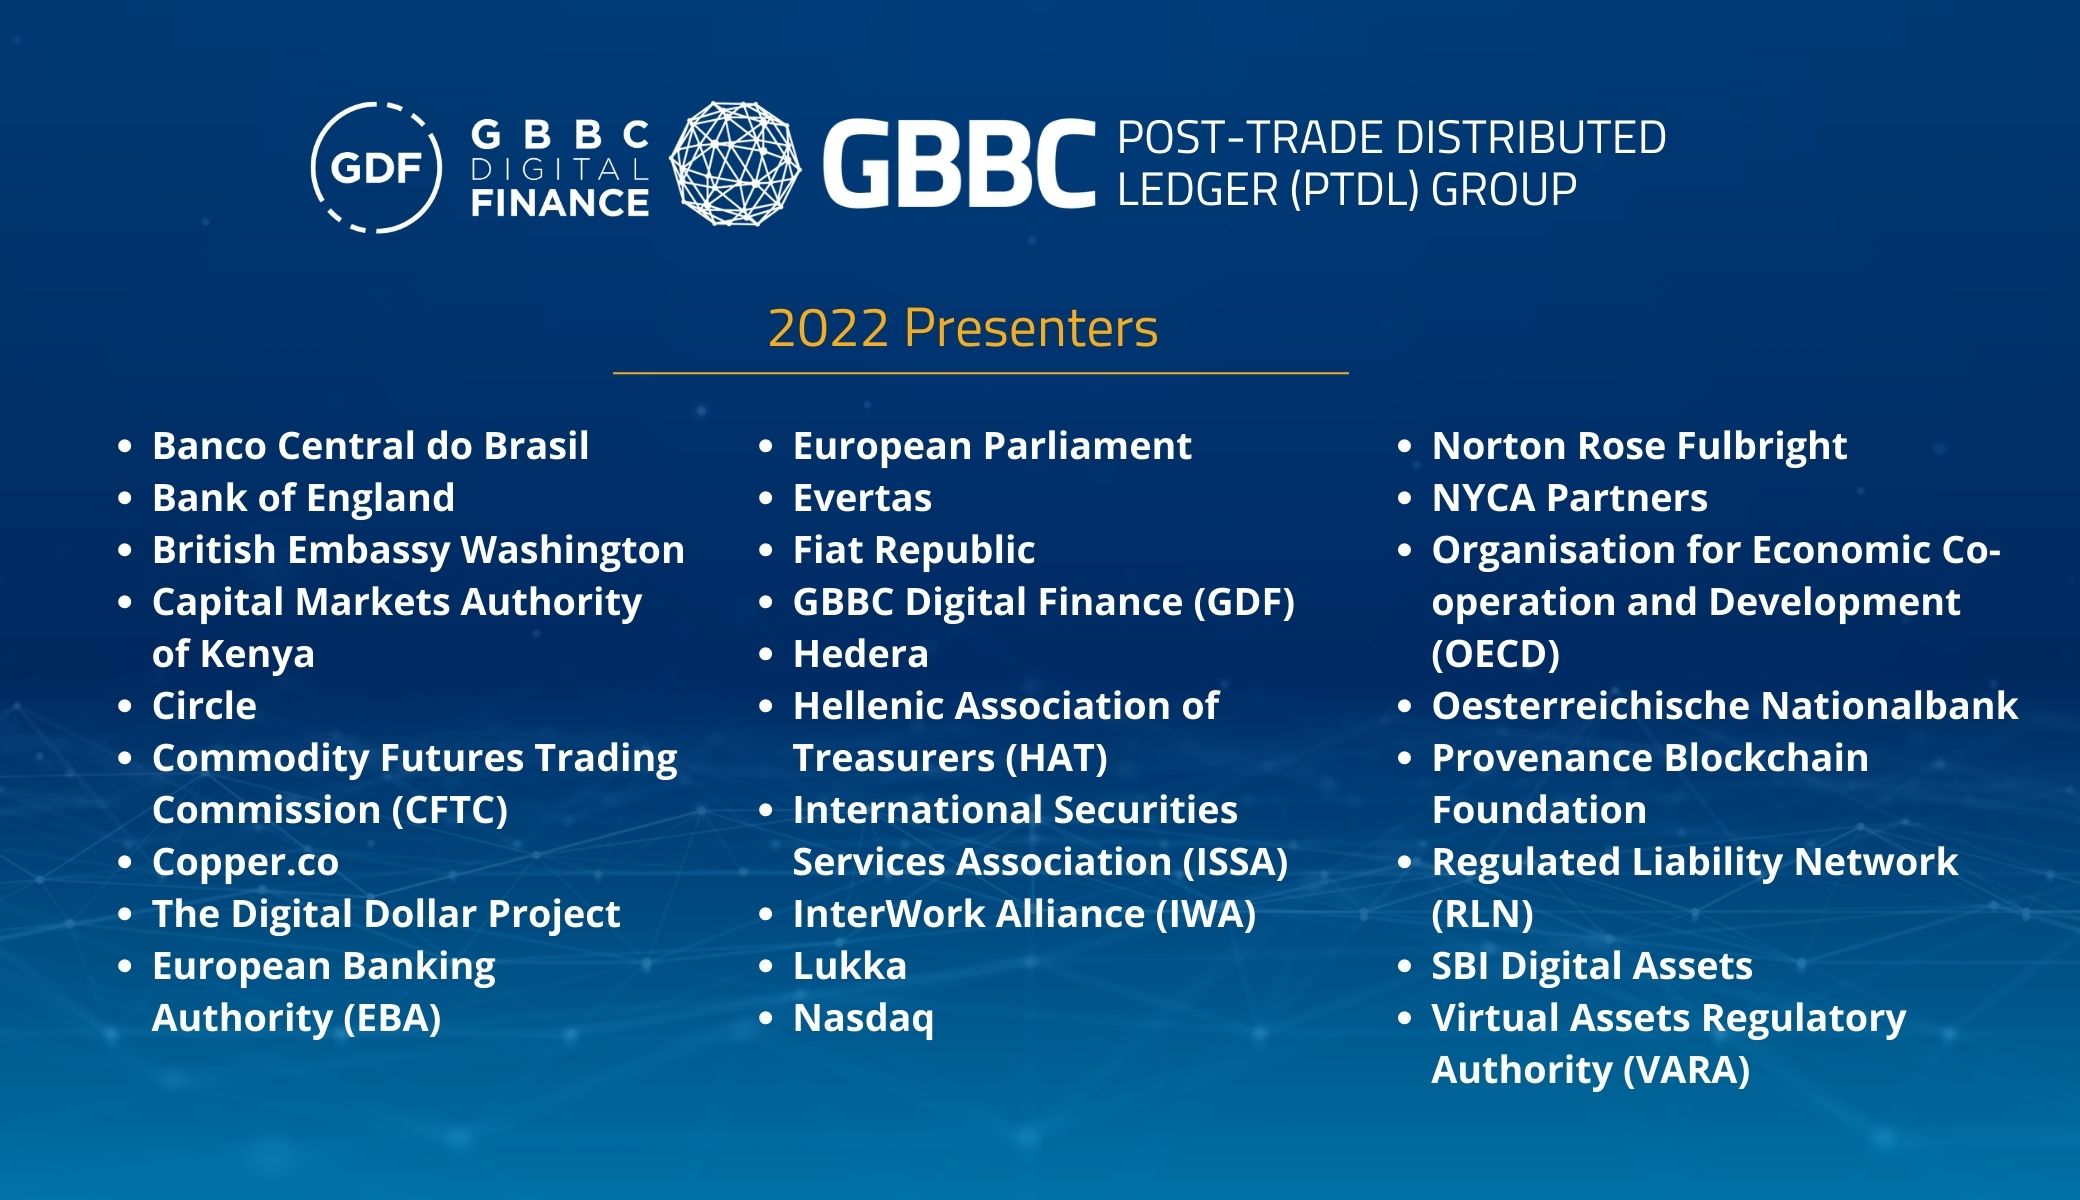 List of presenters in the year 2022 at GBBC's Post Trade Distributed Ledger Group</p>
<p>Banco Central do Brasil<br />
Bank of England<br />
British Embassy Washington<br />
Capital Markets Authority of Kenya<br />
Circle<br />
Commodity Futures Trading Commission (CFTC)<br />
Copper.co<br />
The Digital Dollar Project<br />
European Banking Authority (EBA)<br />
European Parliament<br />
Evertas<br />
Fiat Republic<br />
GBBC Digital Finance (GDF)<br />
Hedera<br />
Hellenic Association of Treasurers (HAT)<br />
International Securities Services Association (ISSA)<br />
InterWork Alliance (IWA)<br />
Lukka<br />
Nasdaq<br />
Norton Rose Fulbright<br />
NYCA Partners<br />
Organisation for Economic Co-operation and Development (OECD)<br />
Oesterreichische Nationalbank<br />
Provenance Blockchain Foundation<br />
Regulated Liability Network (RLN)<br />
SBI Digital Assets<br />
Virtual Assets Regulatory Authority (VARA)<br />
